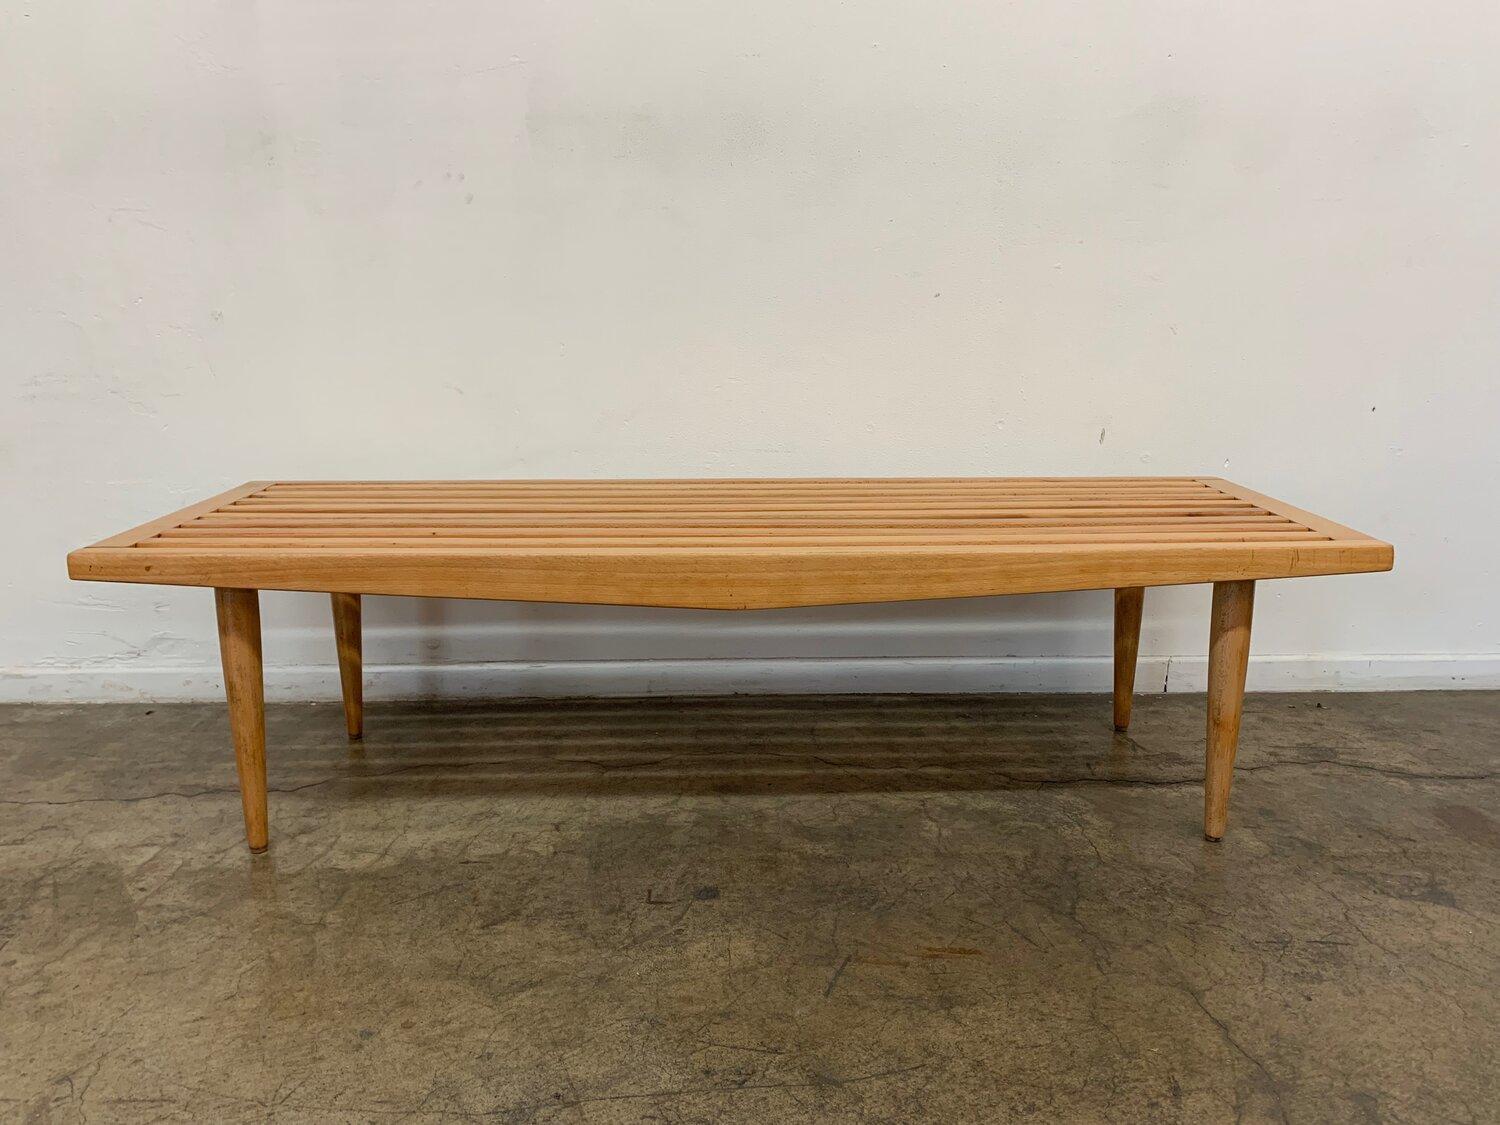 Measures: W53.75 // D18 // H14.25

Fully restored slatted mid-century bench. Item shows very well and is structurally sound.